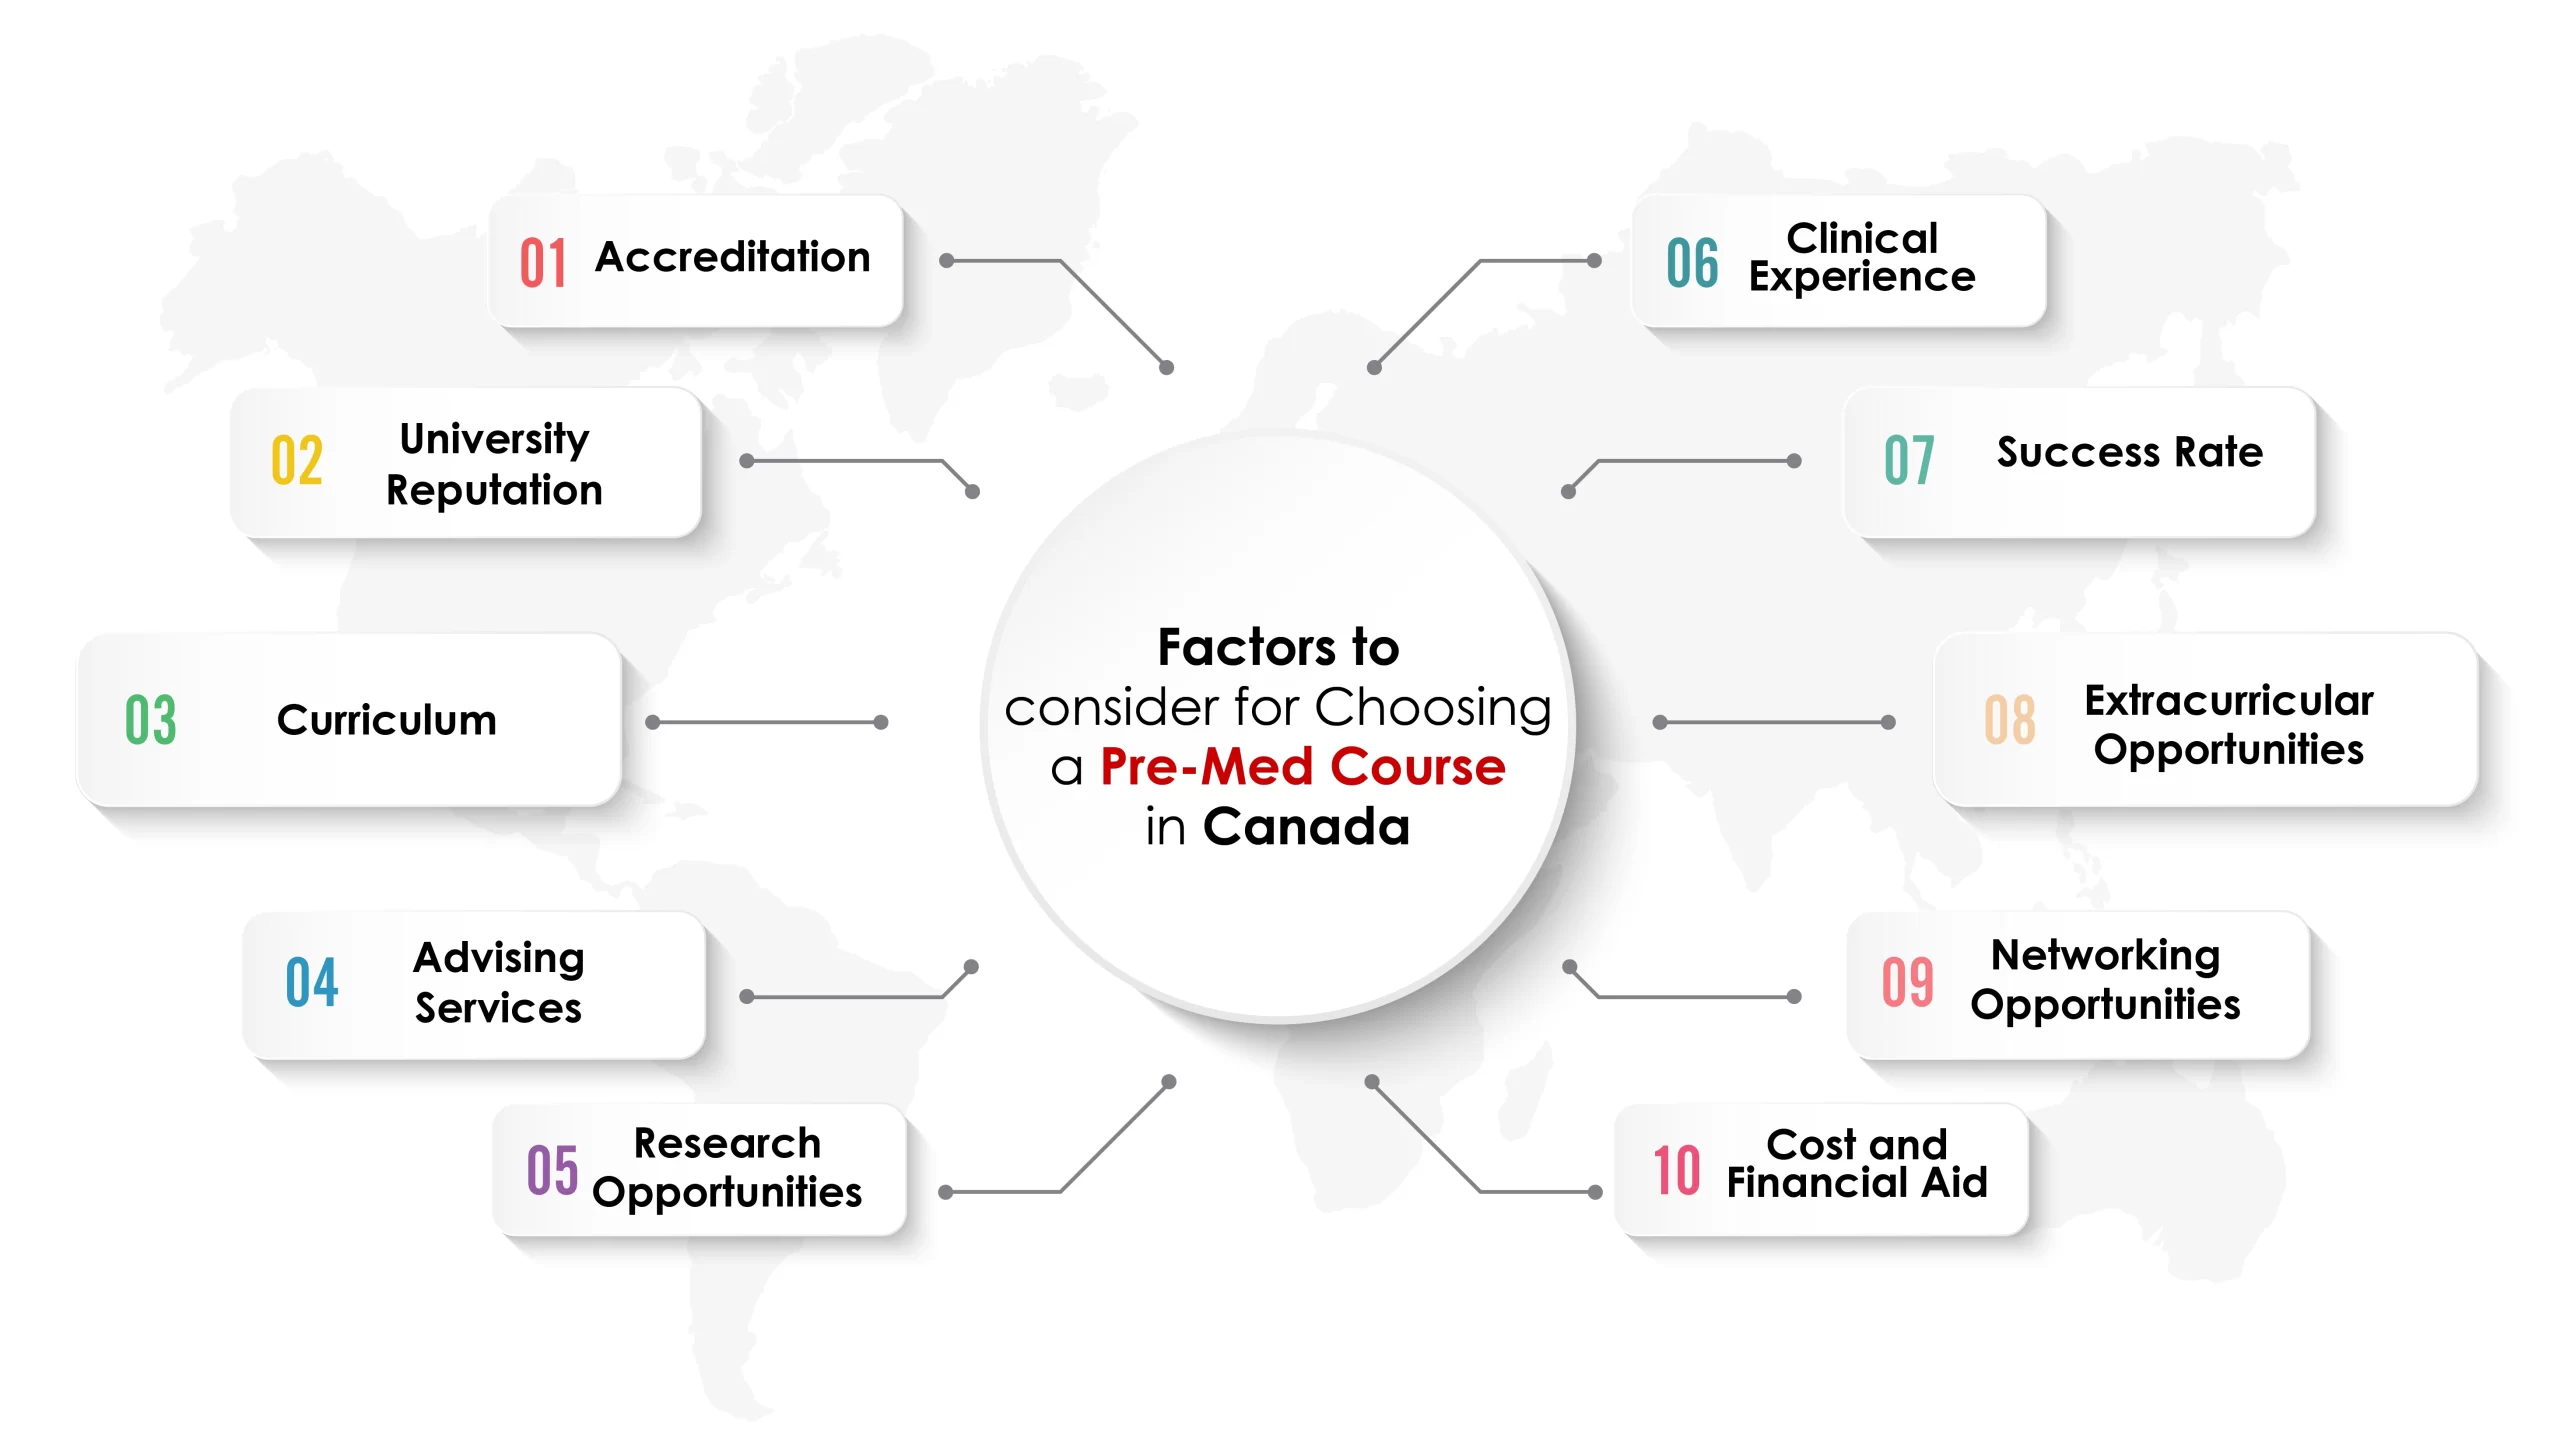 Factors to consider for choosing a pre-med course in Canada